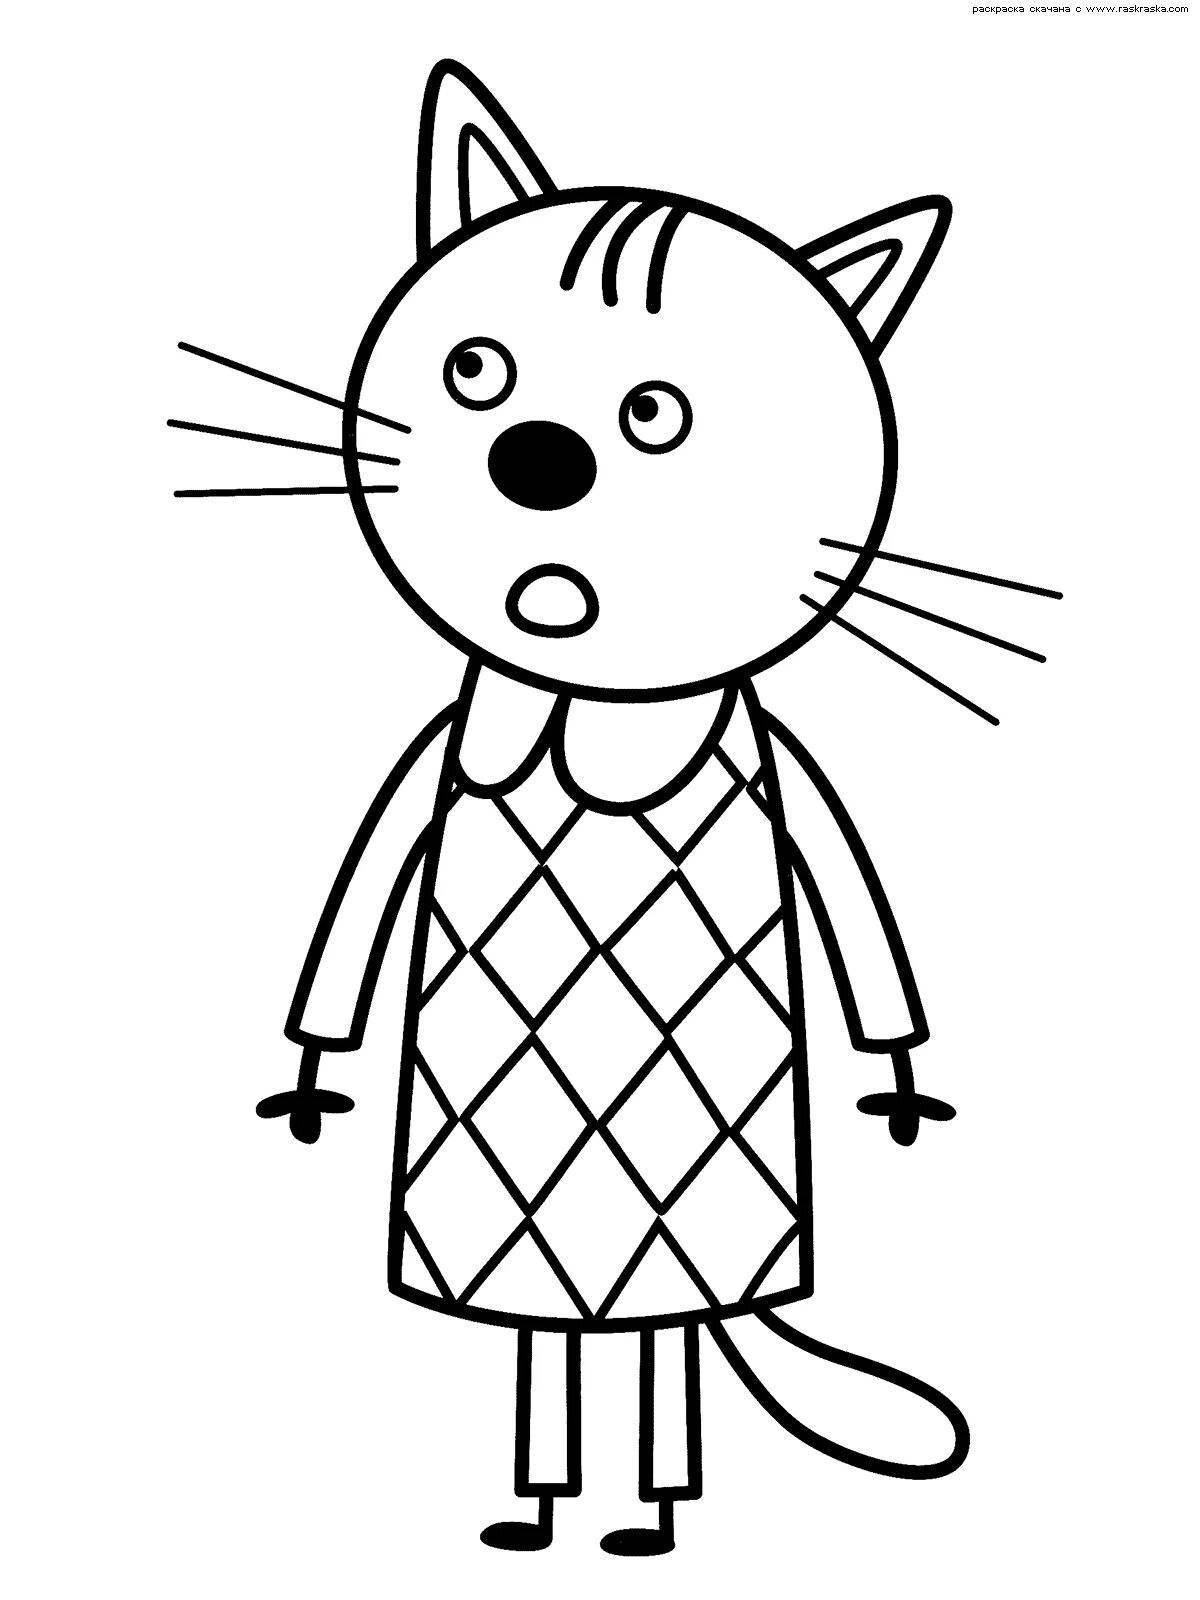 Adorable chasing three cats coloring page